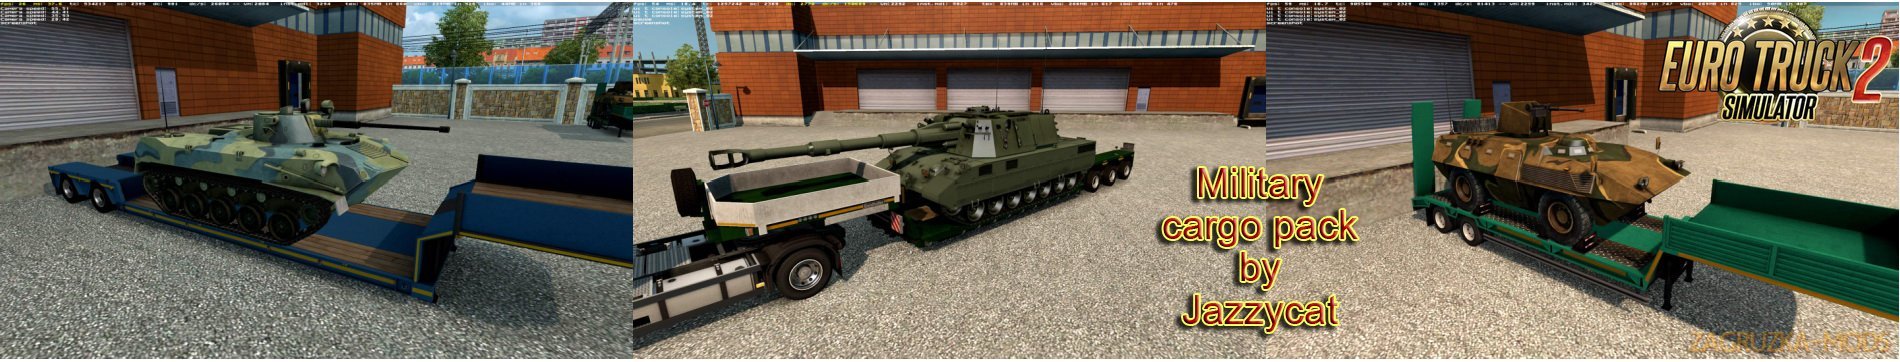 Military Cargo Pack v2.2.1 by Jazzycat [1.27.x]